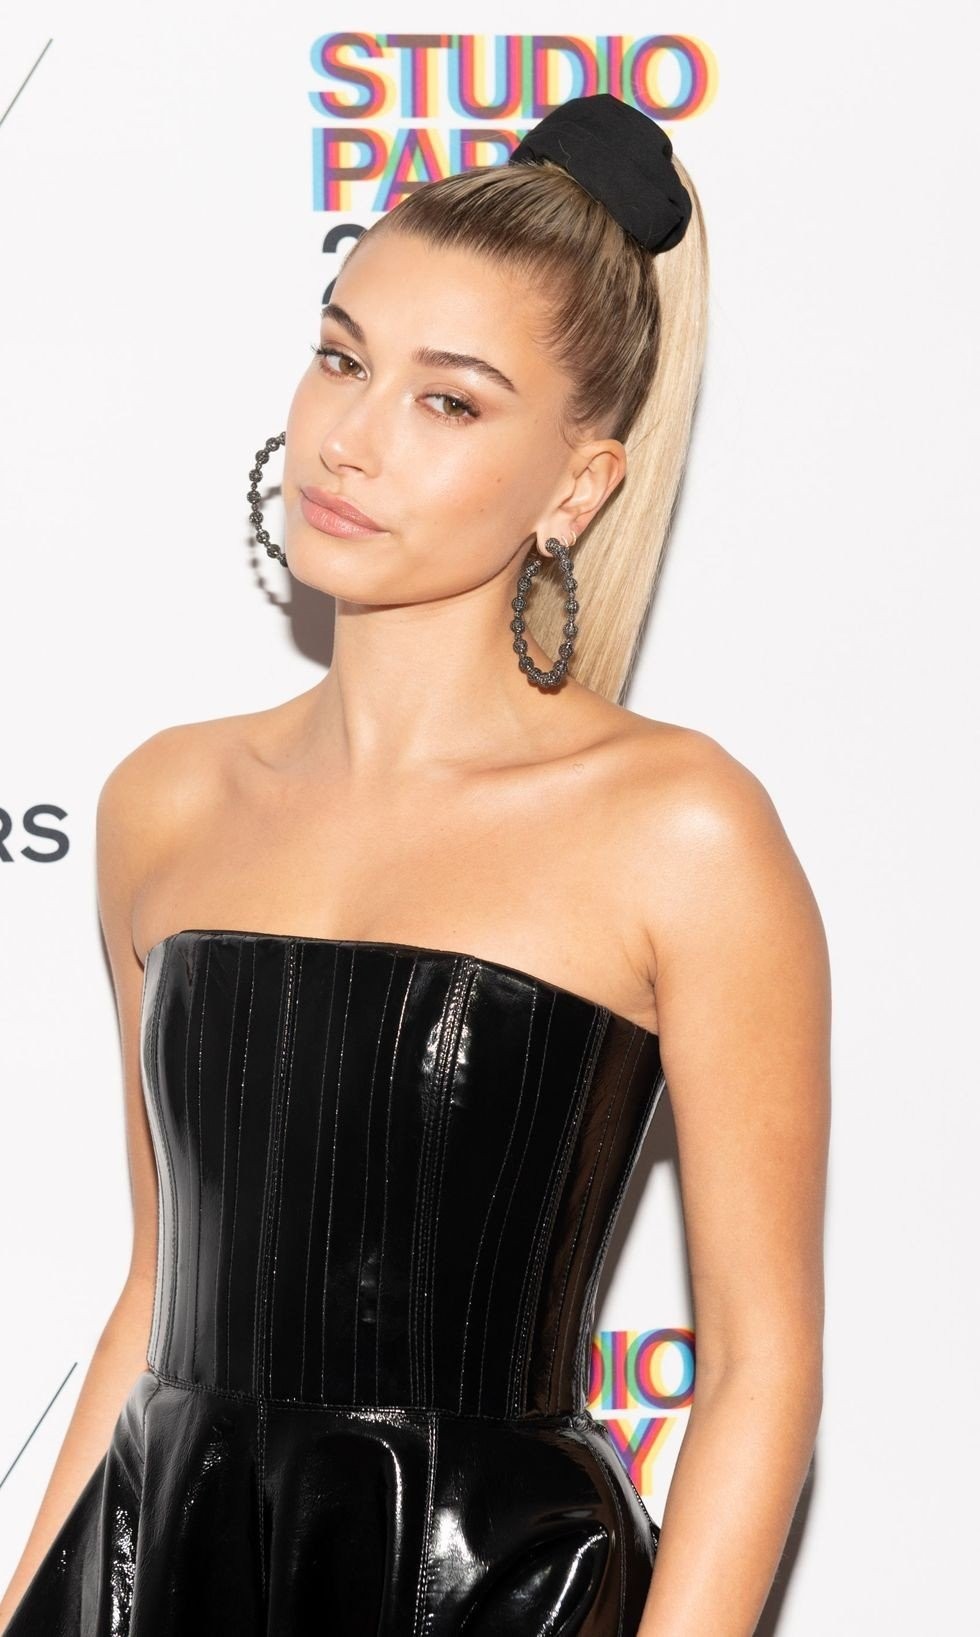 hailey-baldwin-attends-the-whitney-museum-celebrates-the-news-photo-1578434215.jpg